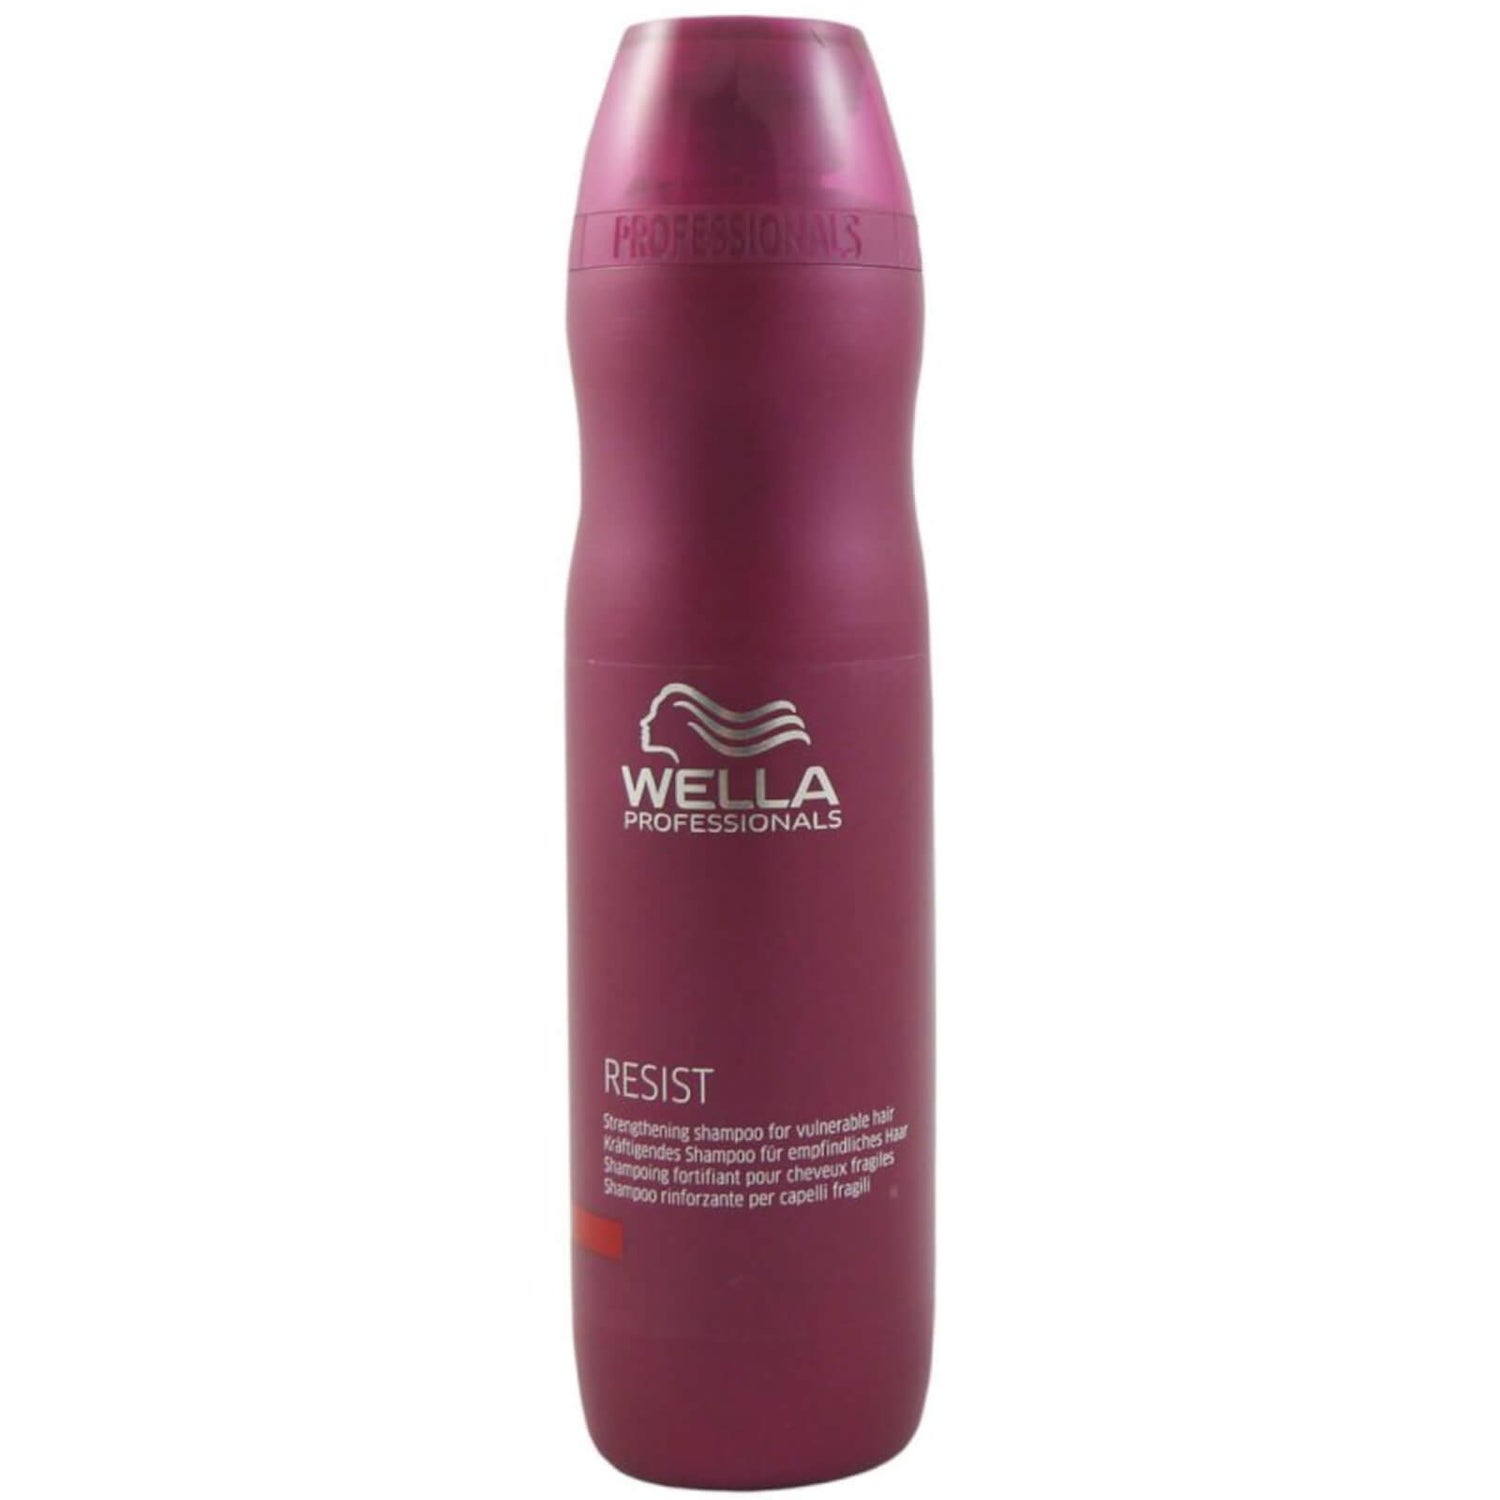 Wella Professionals Resist Strengthening Shampoo For Vulnerable Hair (250 ml)